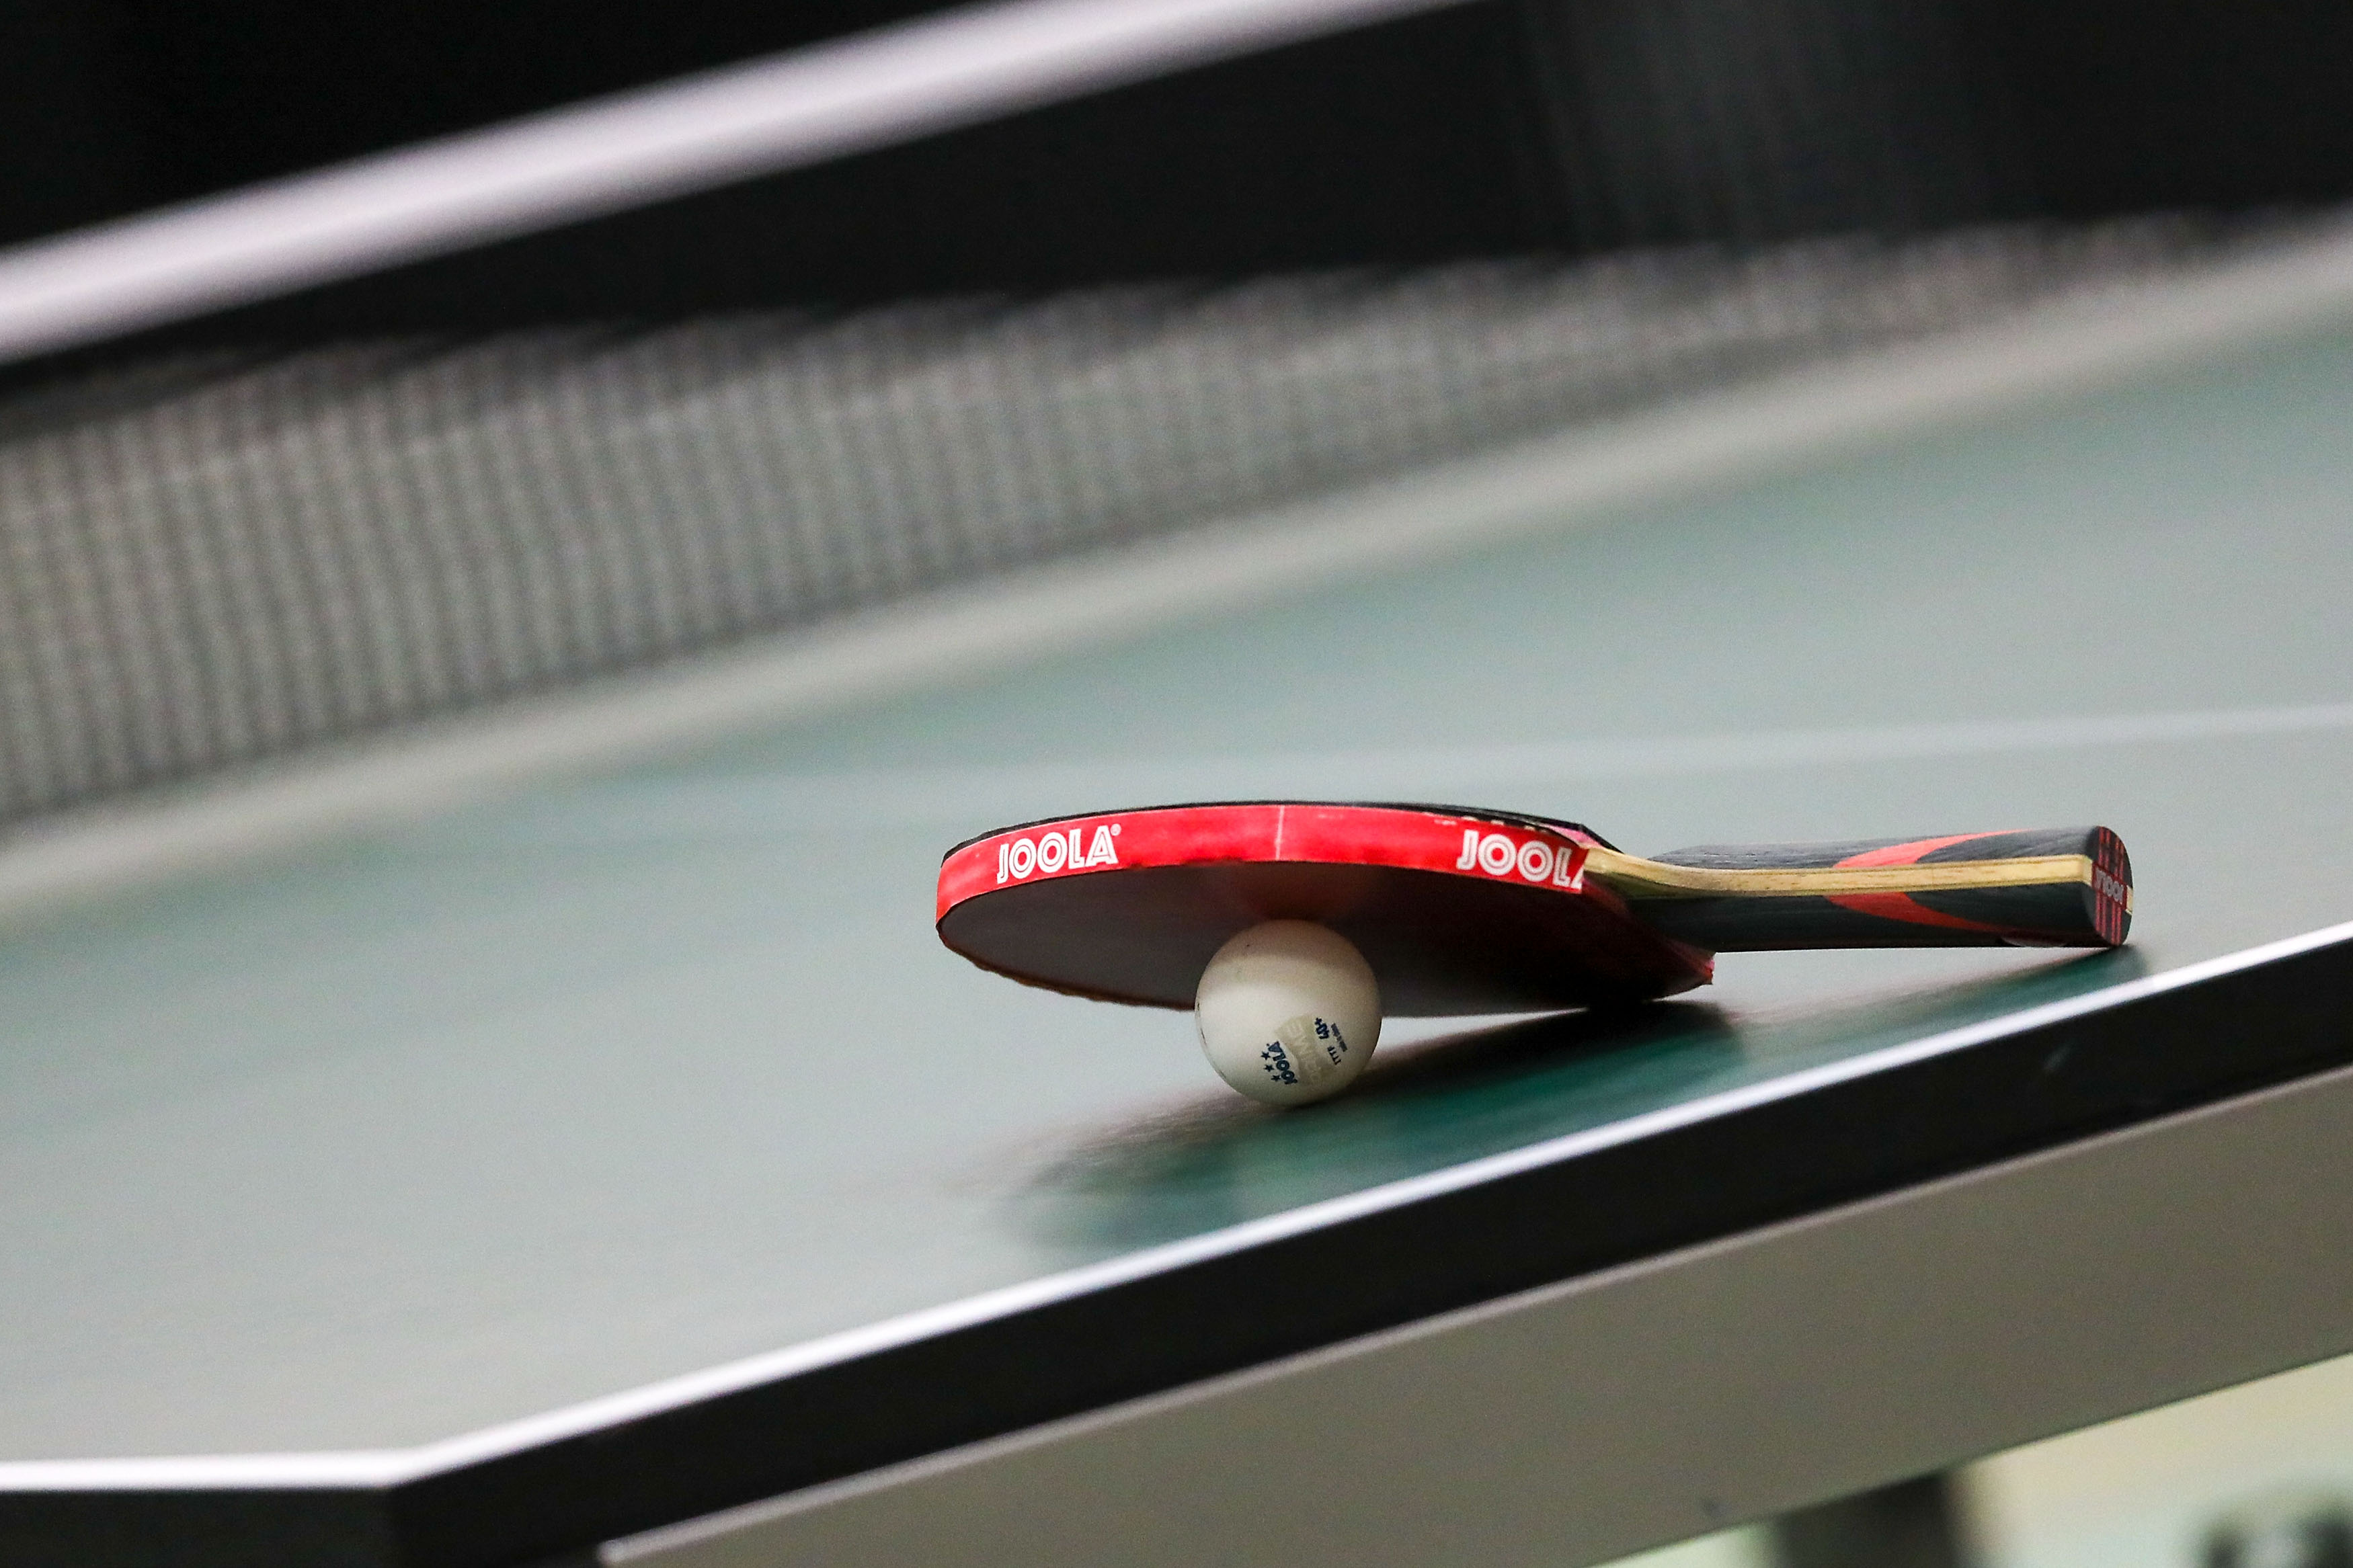 Why 'robots' can help sustainable development of Indian Table Tennis at grassroots levels